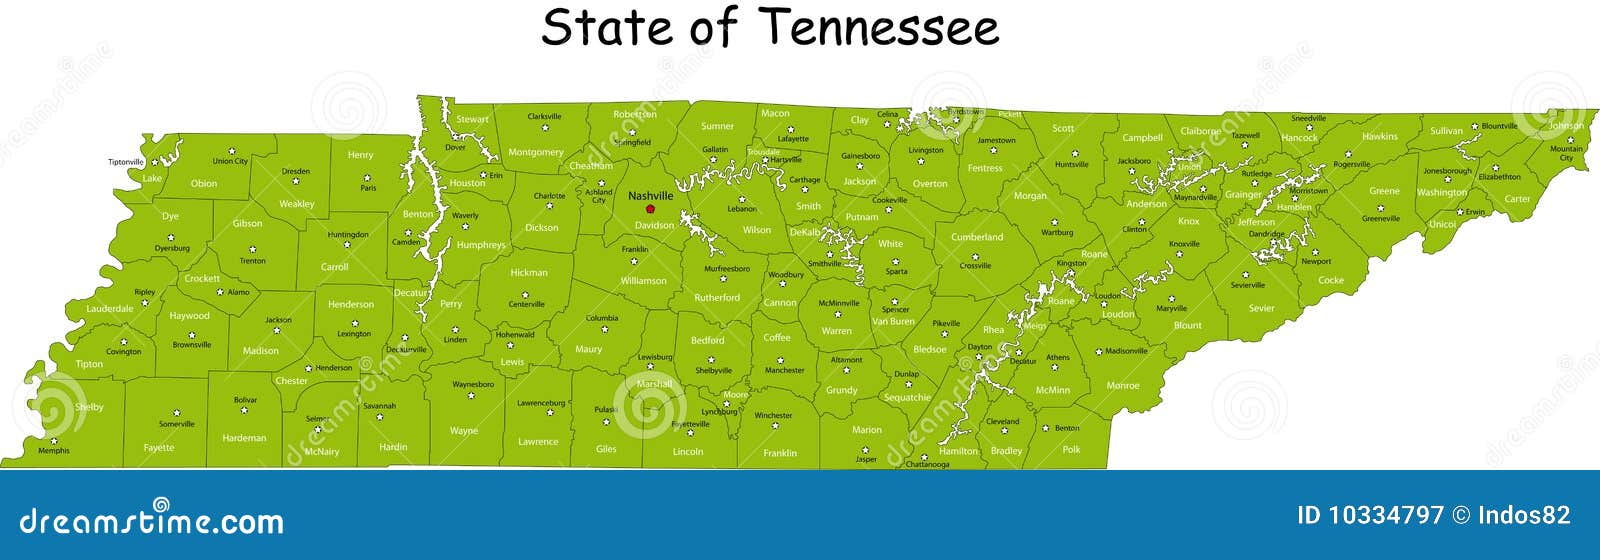 free clipart map of tennessee - photo #28